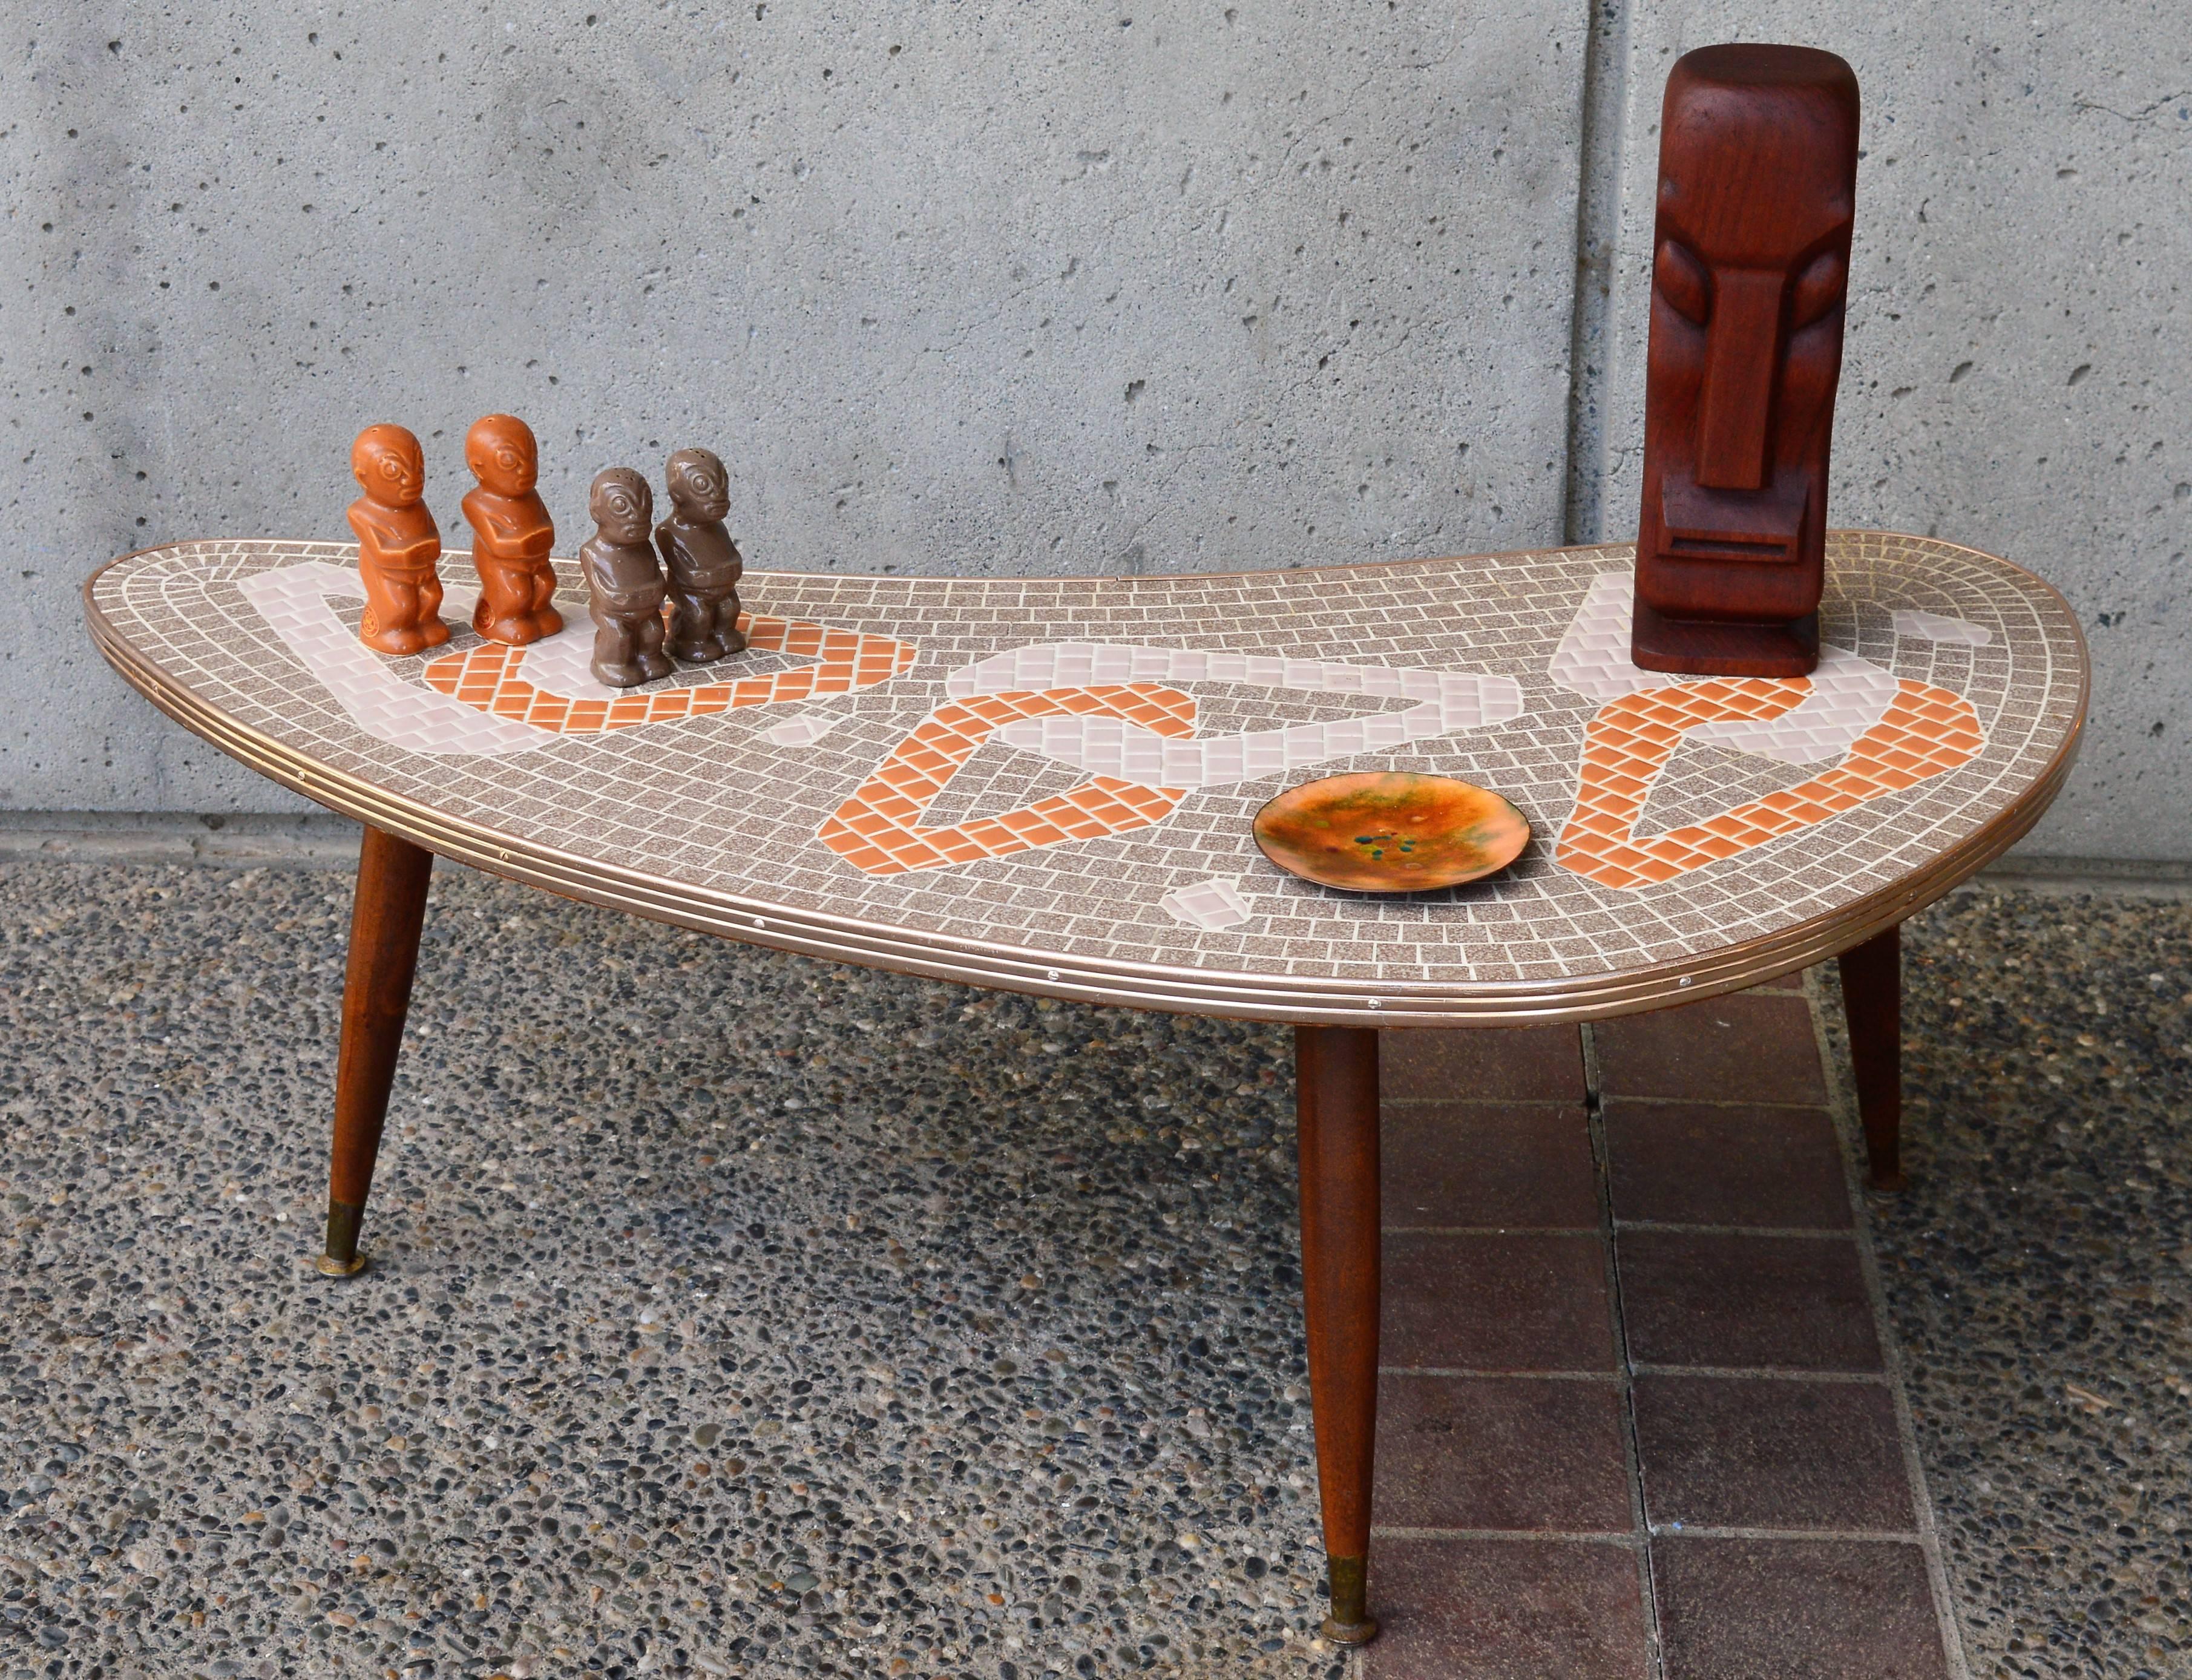 This totally rare and fabulous 1950s Mid-Century Modern Atomic era boomerang coffee table has a striking tile mosaic top with a chain link pattern in ecru, cream and burnt orange. Finished with a pink copper toned metal edging and three splayed